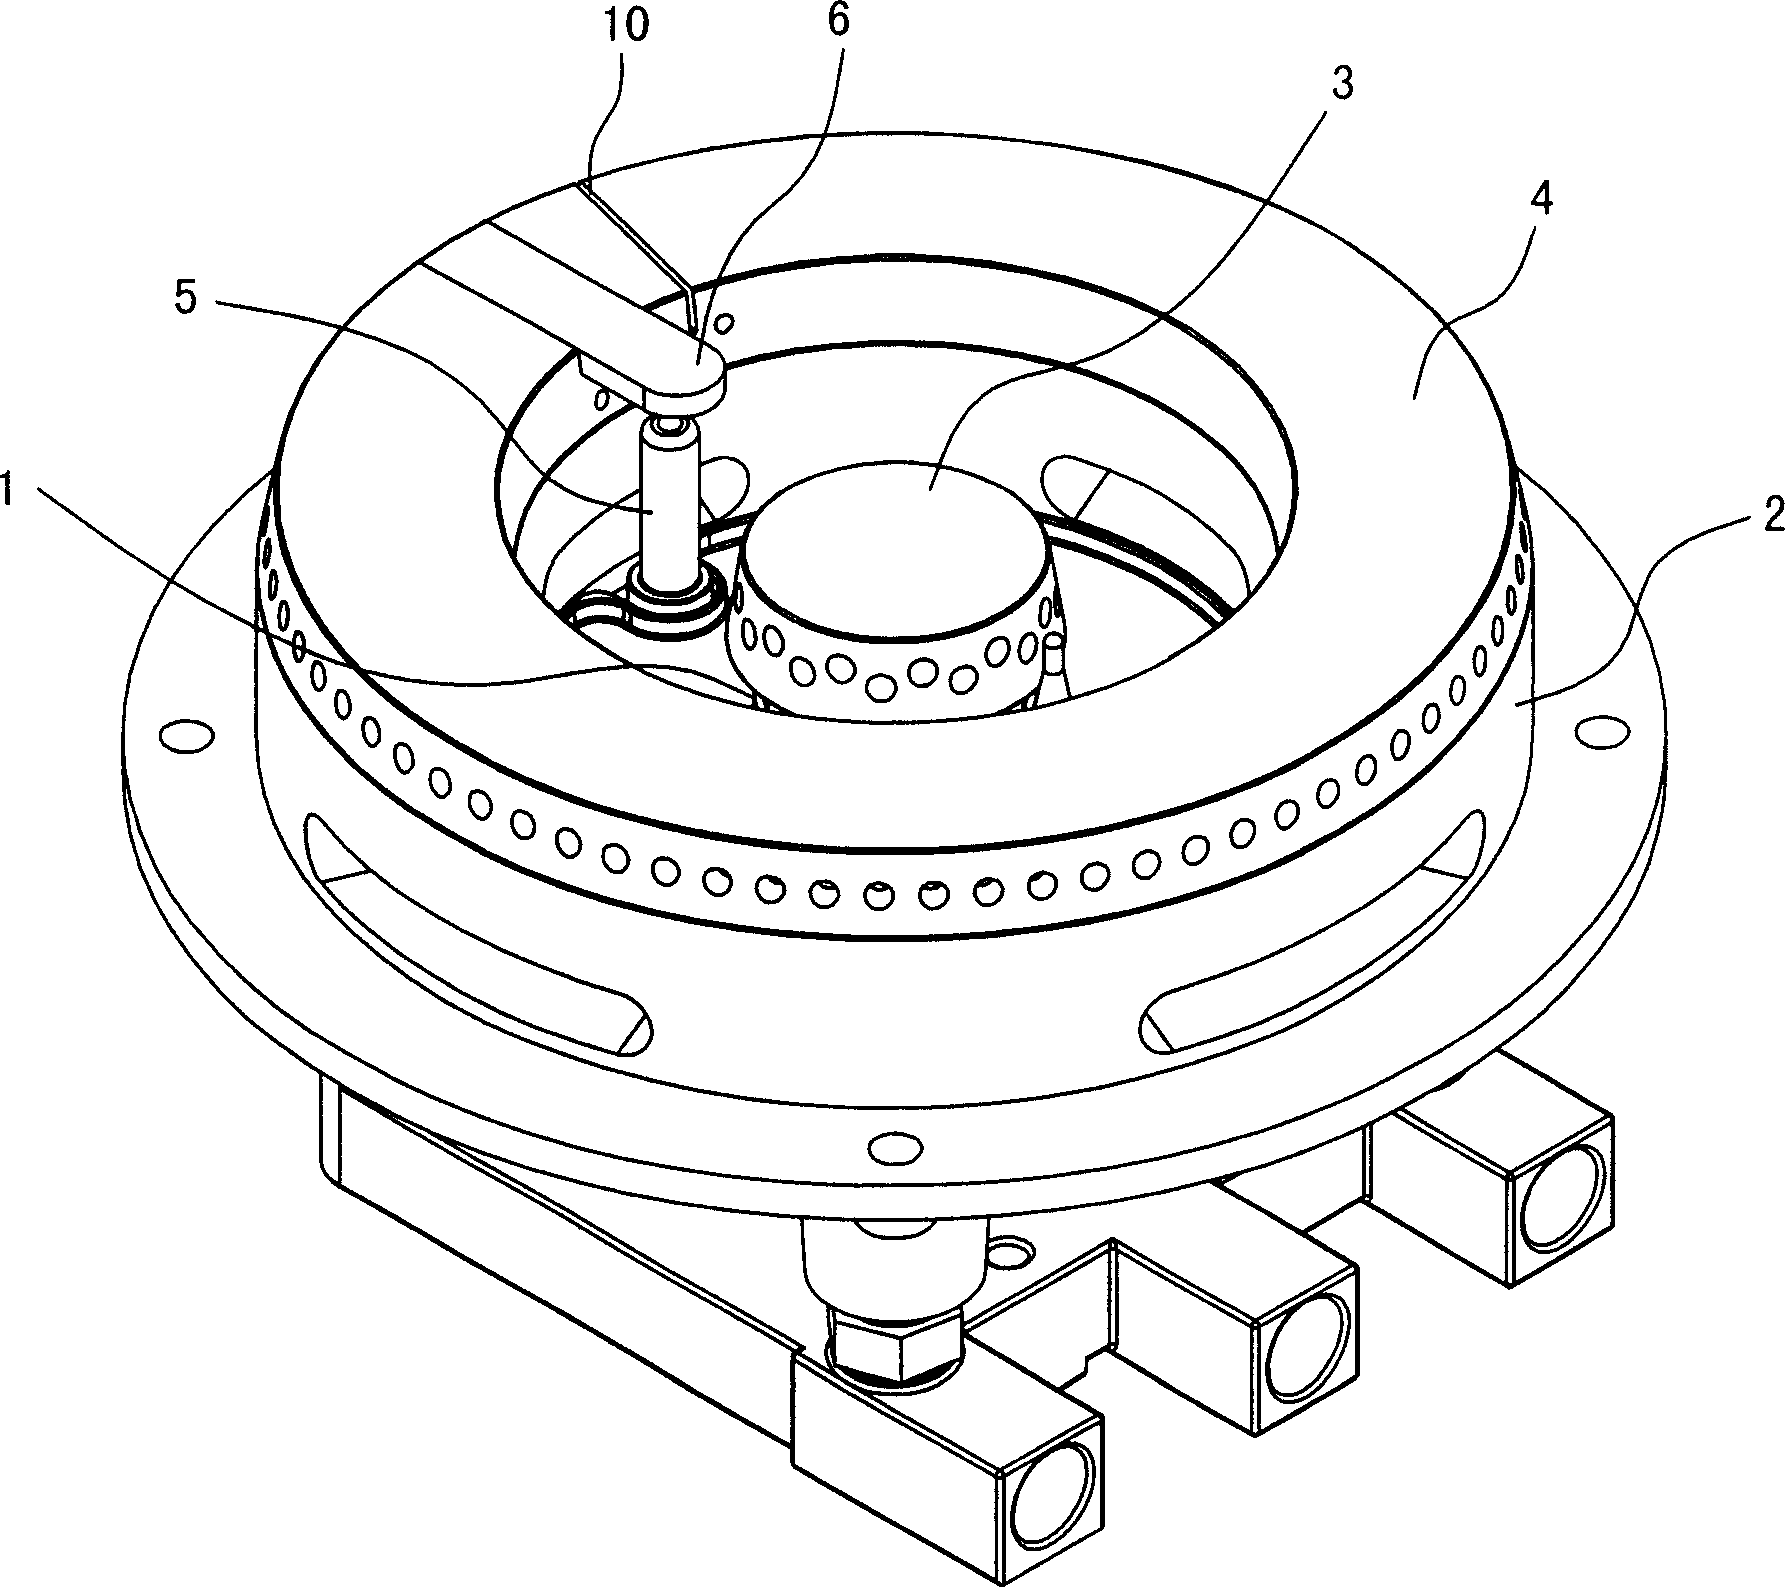 Burner with ignition needle protection structure